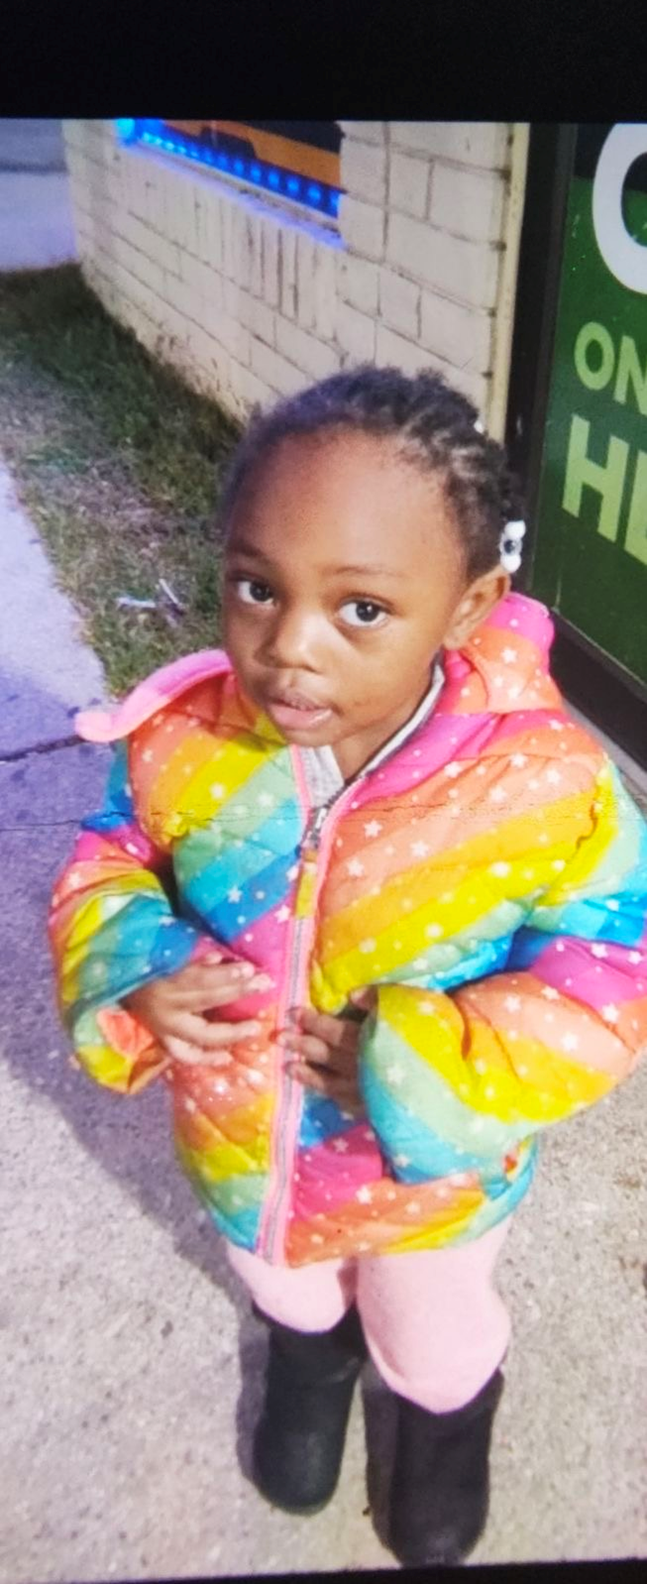 Four-year-old Zekani Hymes was killed in a hit-and-run crash.